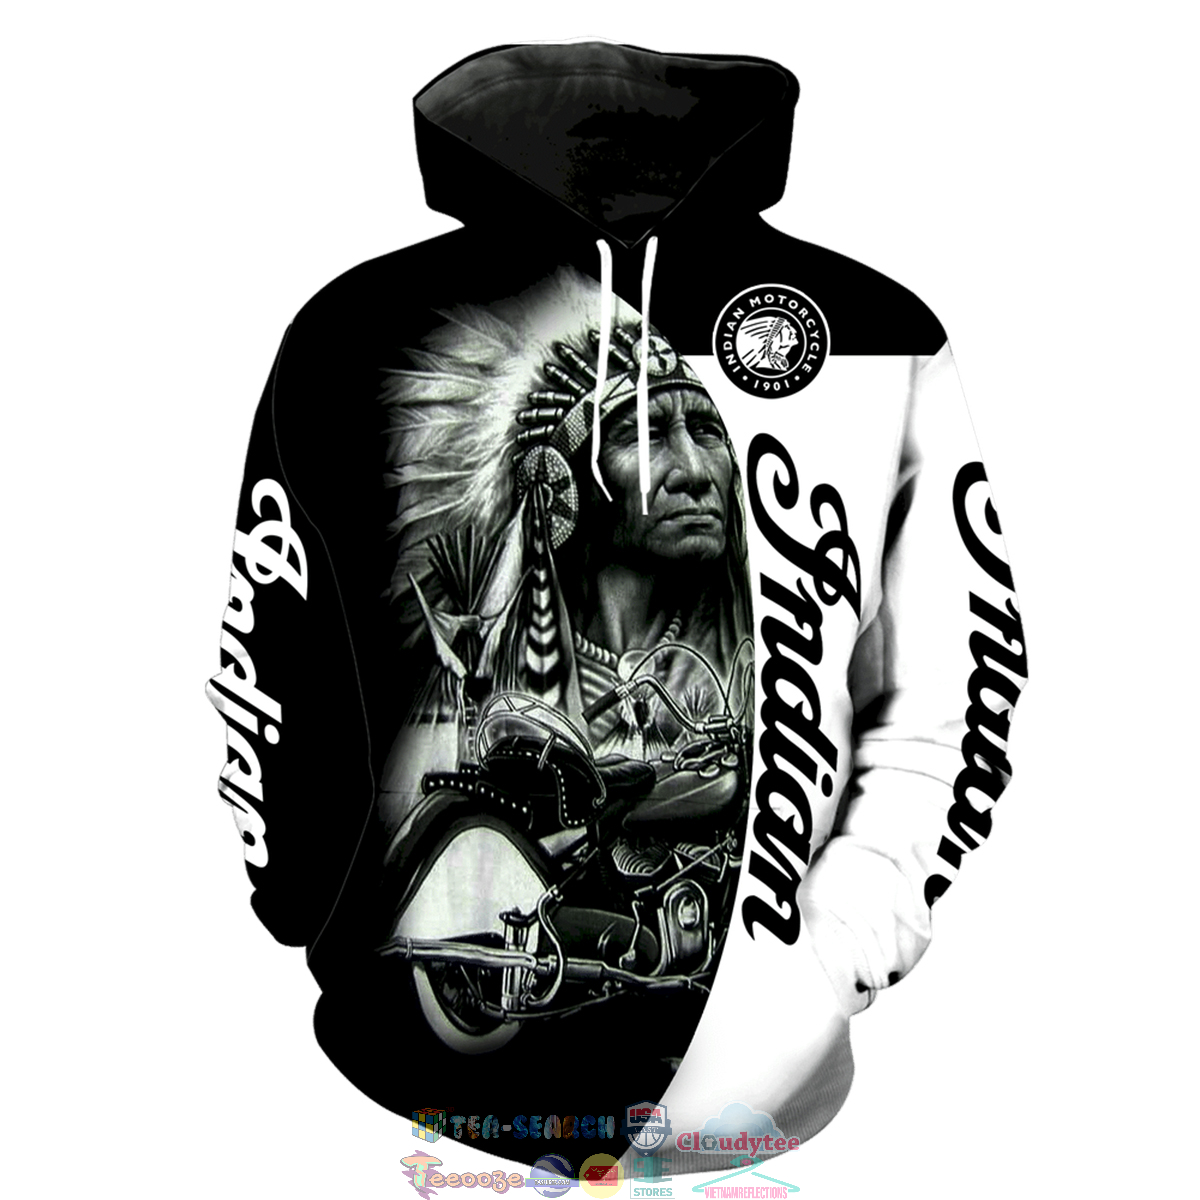 HTNsoPsb-TH040822-29xxxIndian-Motorcycle-ver-6-3D-hoodie-and-t-shirt3.jpg